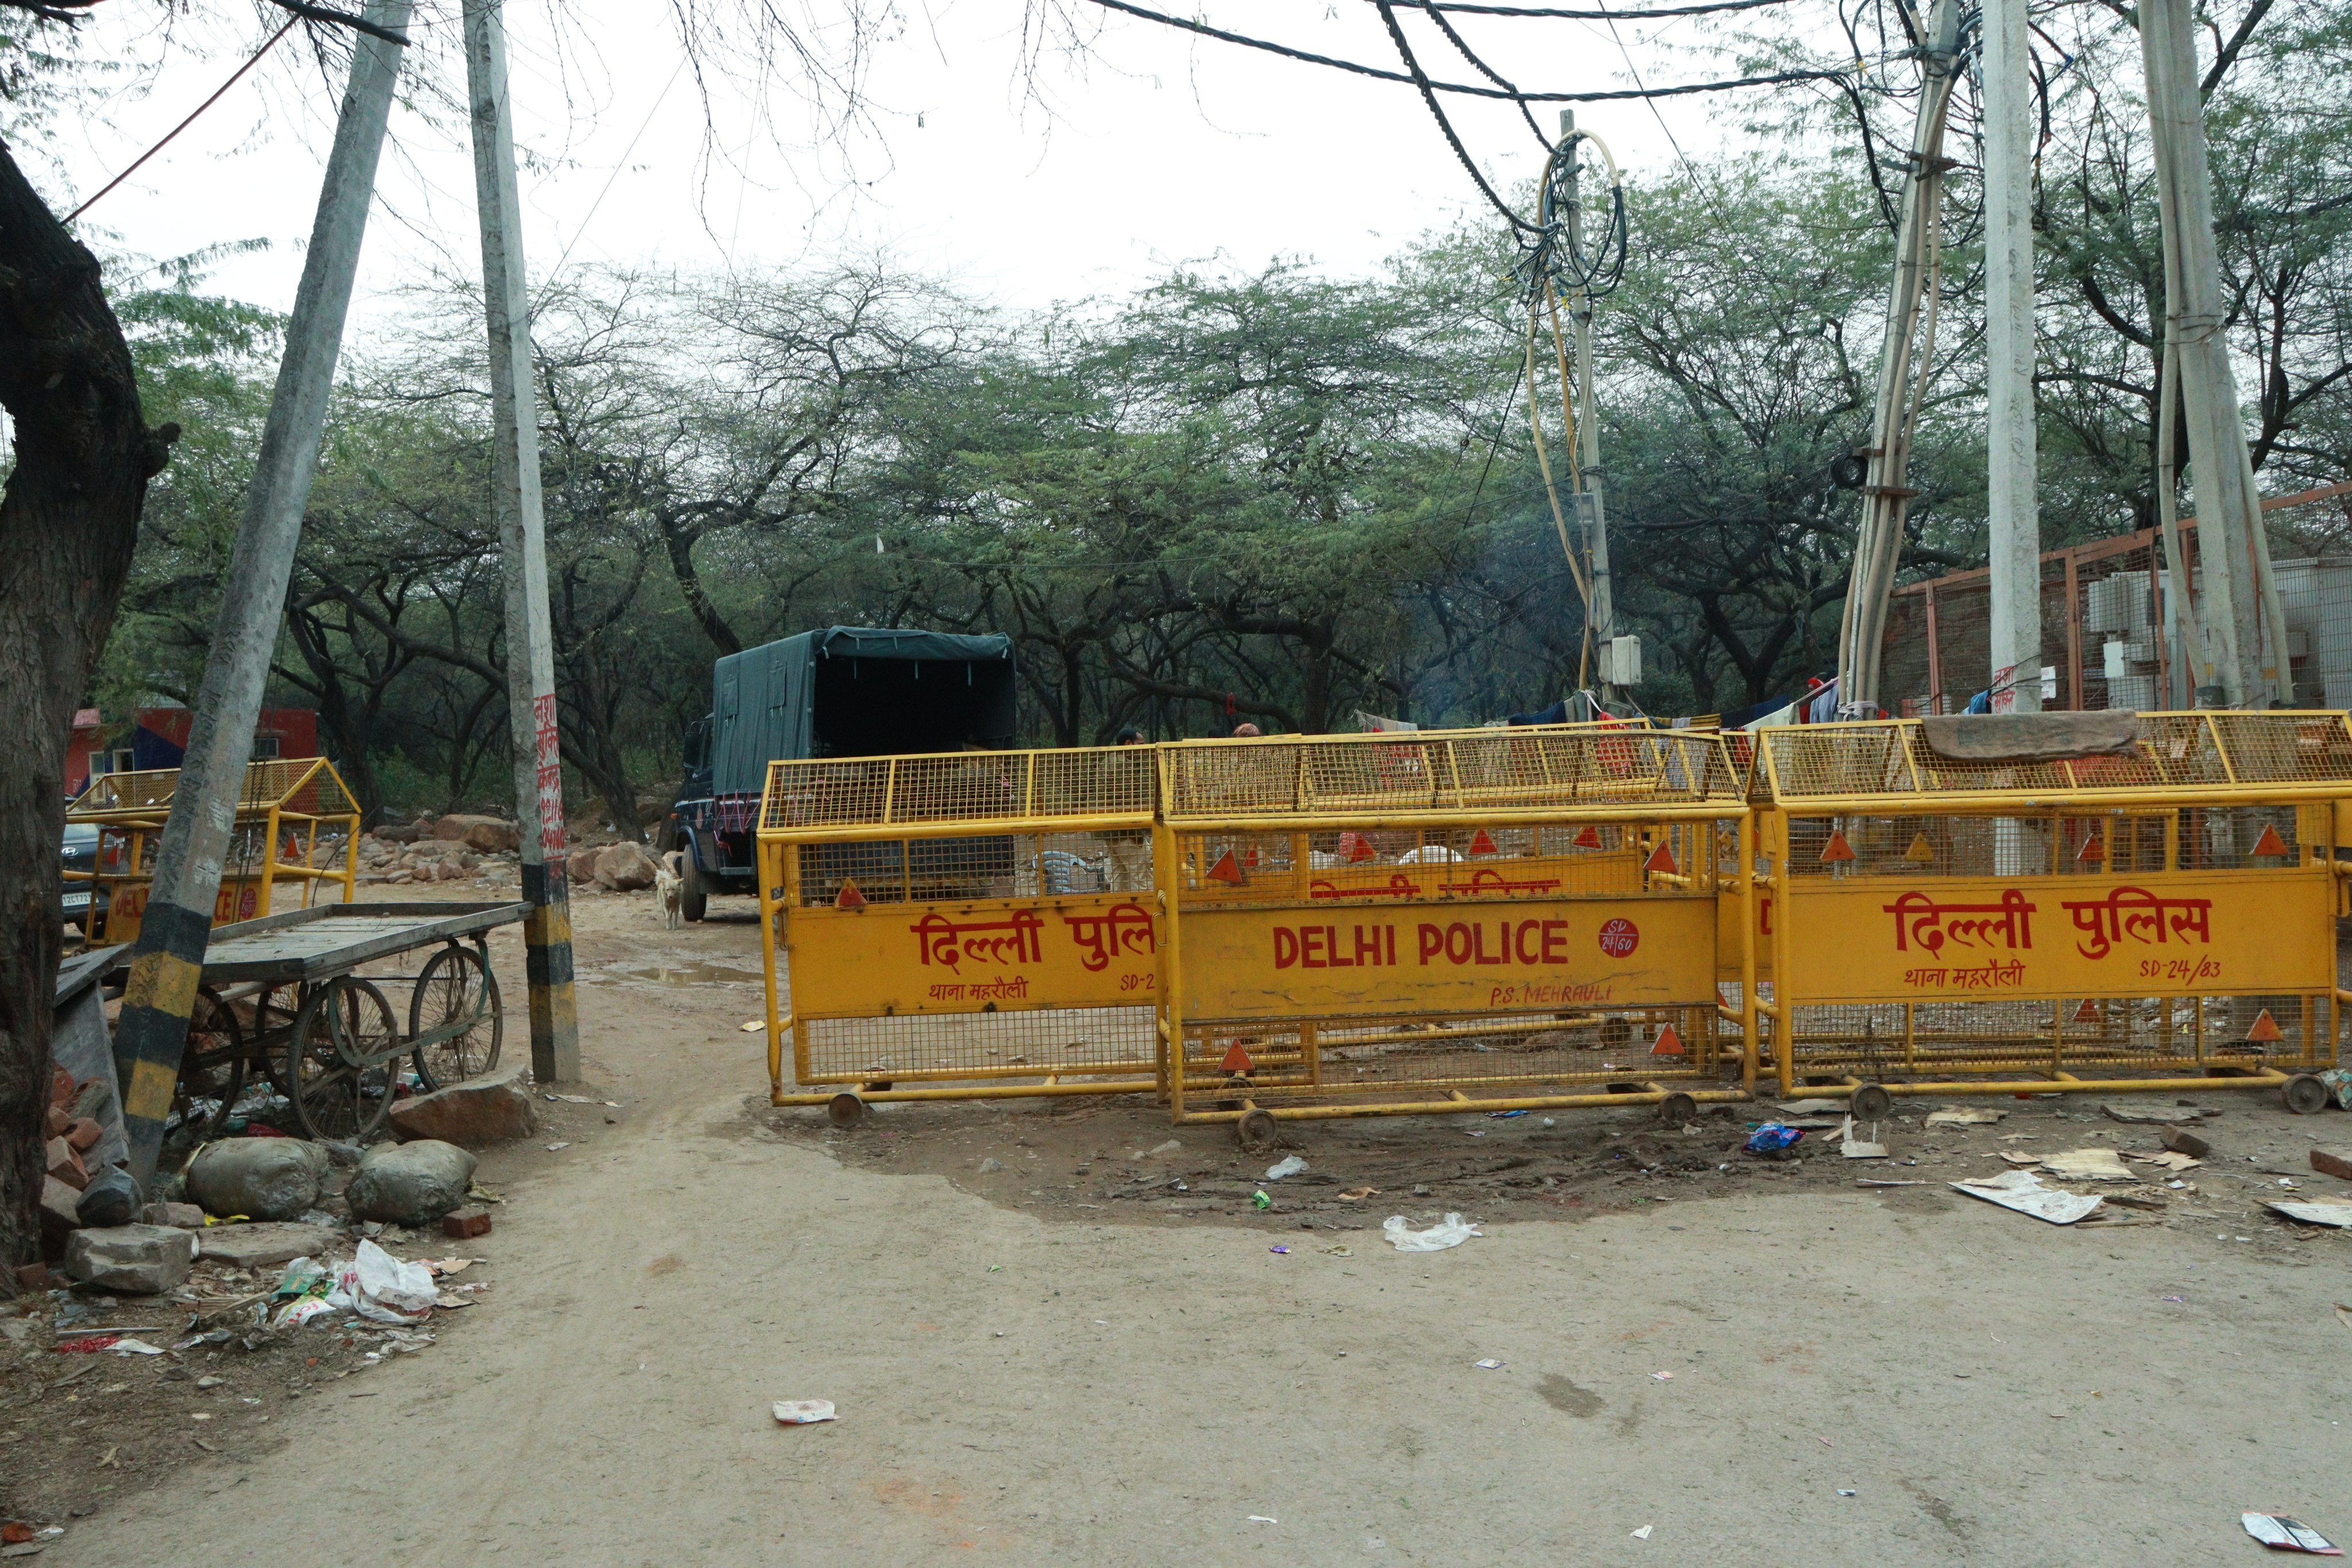 Delhi police barriers block the entrance to the demolition site in the Mehrauli area following the demolition of the 600-year-old mosque by the DDA. Photo: Kaisar Andrabi
